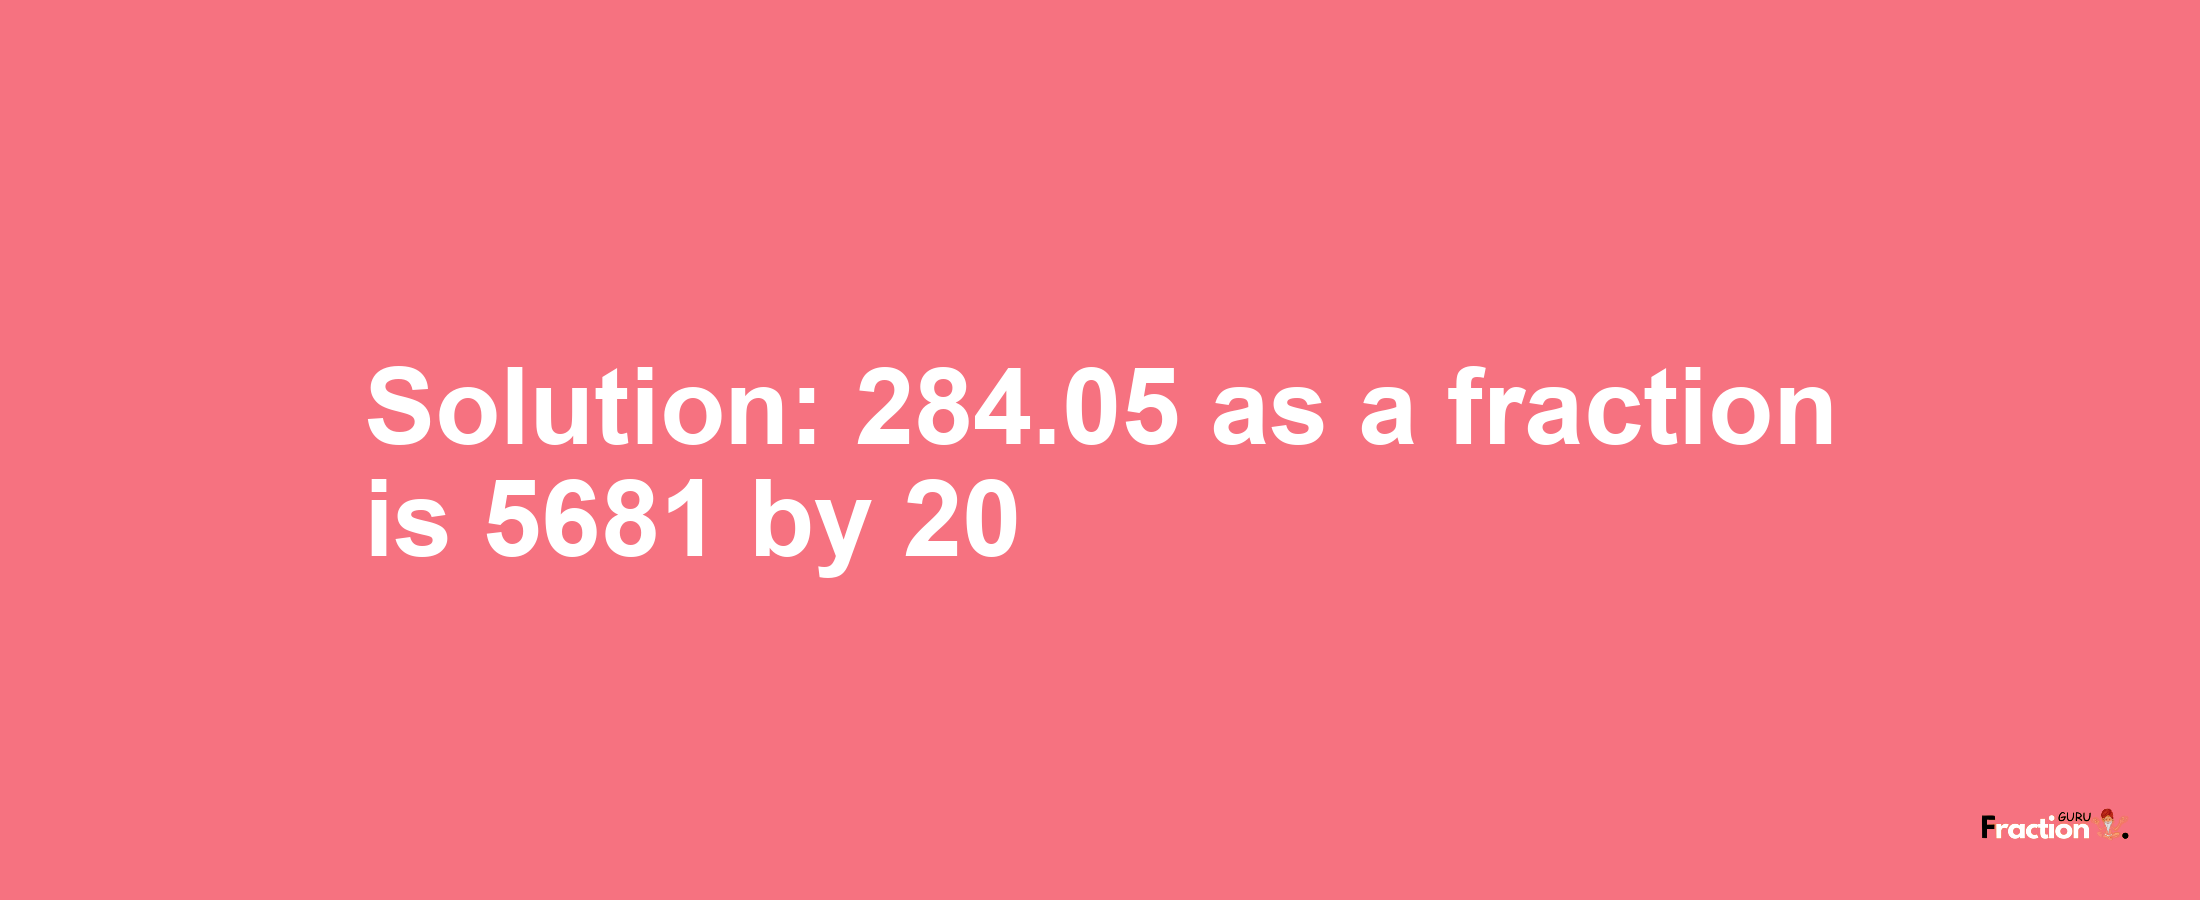 Solution:284.05 as a fraction is 5681/20